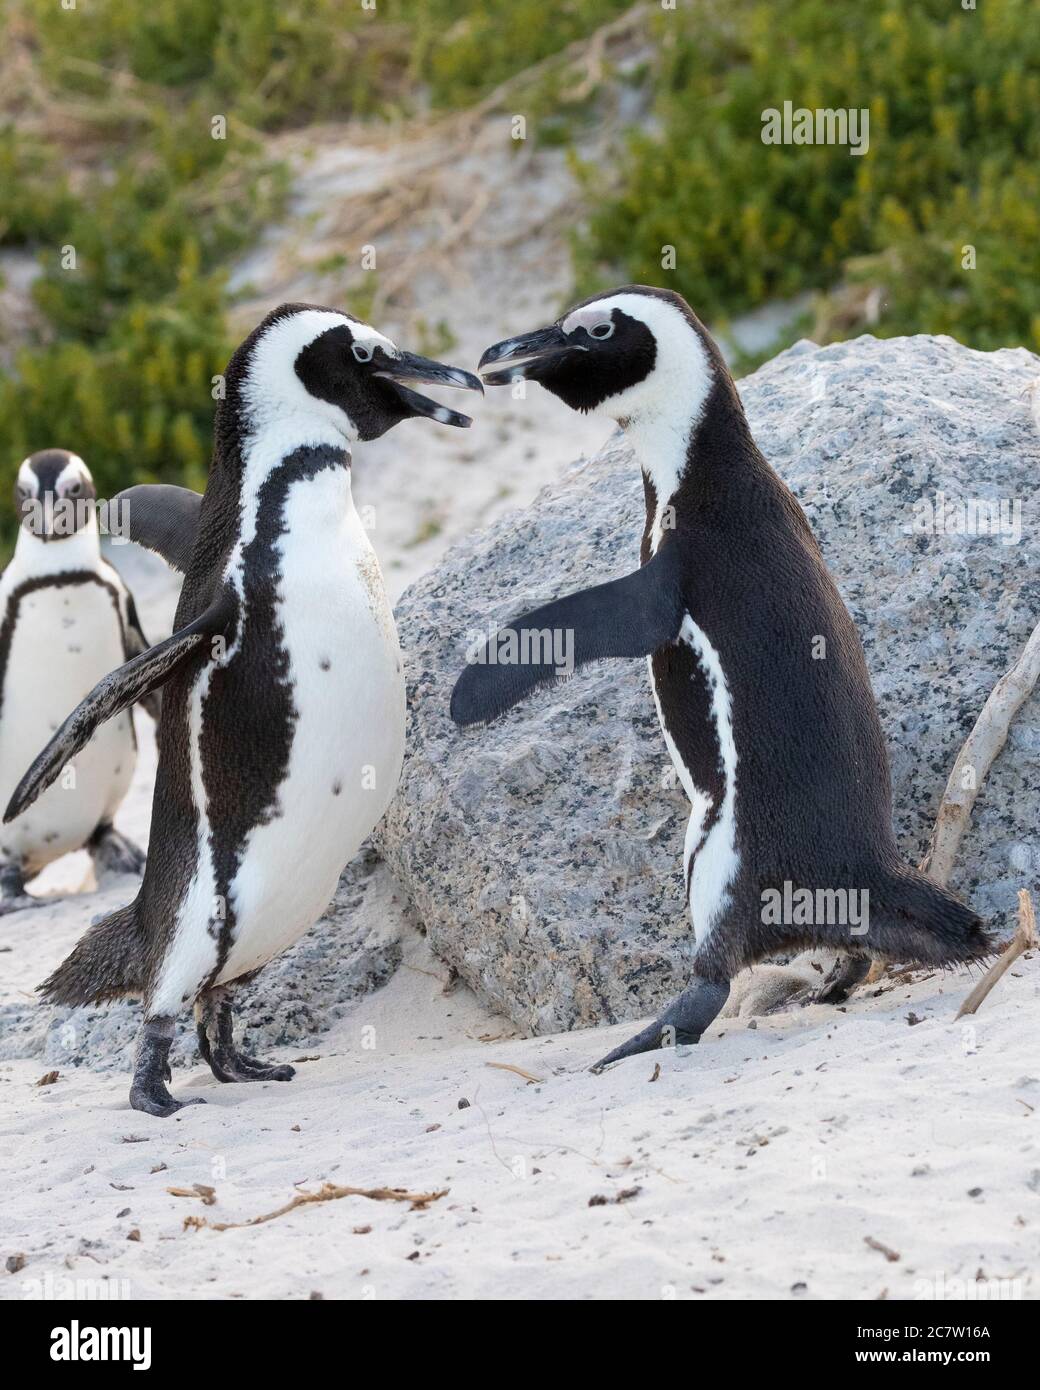 African Penguin (Spheniscus demersus), two adults fighting, Western Cape, South Africa Stock Photo